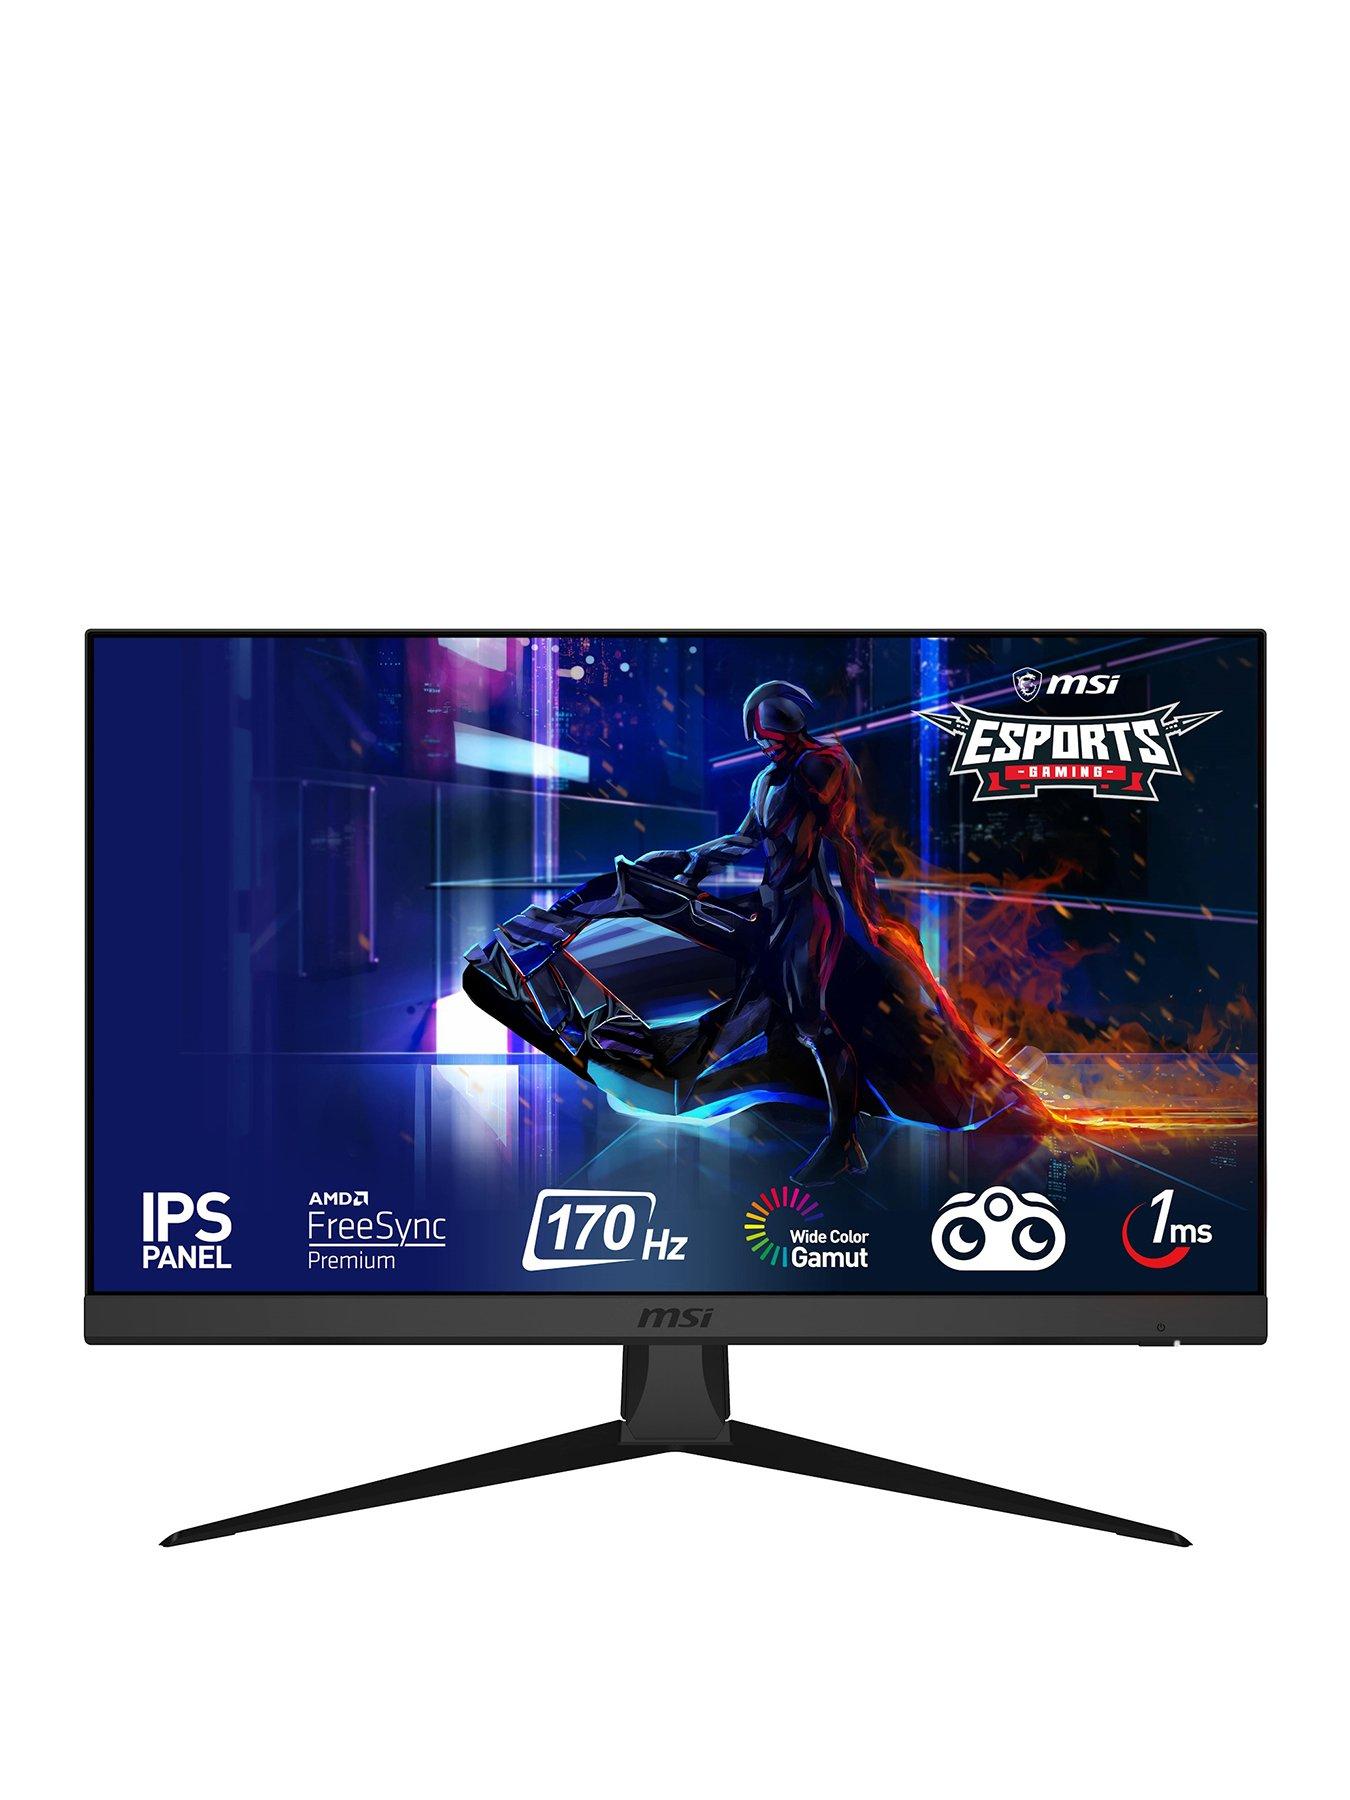 Gaming Ireland Monitors 165hz Very Curved 144hz, | | 1ms | |